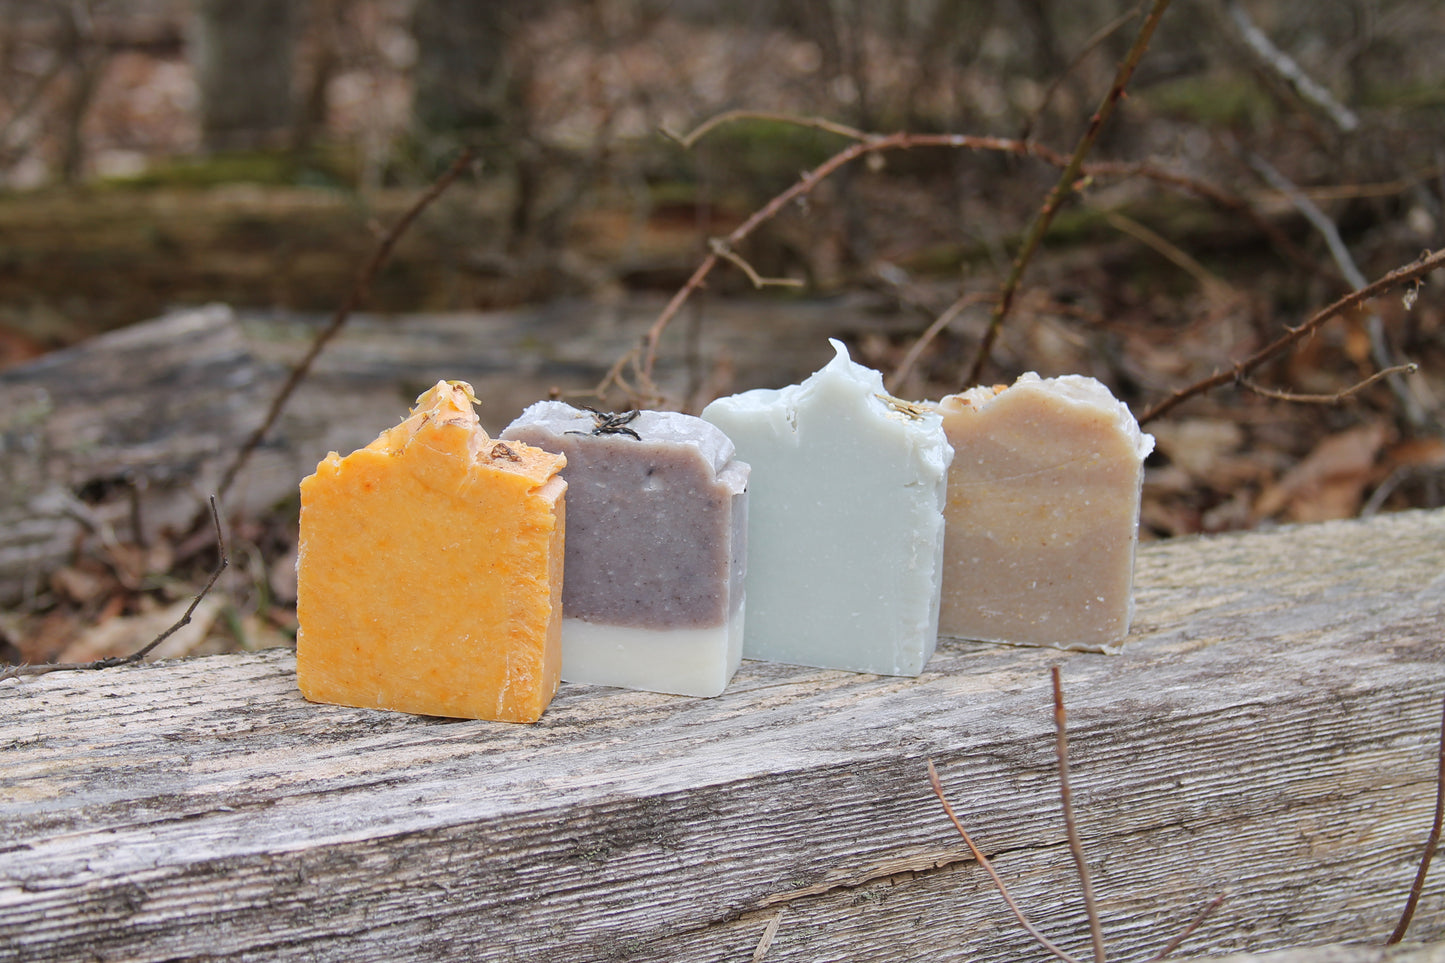 Vermont Small Batch Artisan Handcrafted Cold Process Soap- Palm Free - Belle Savon Vermont